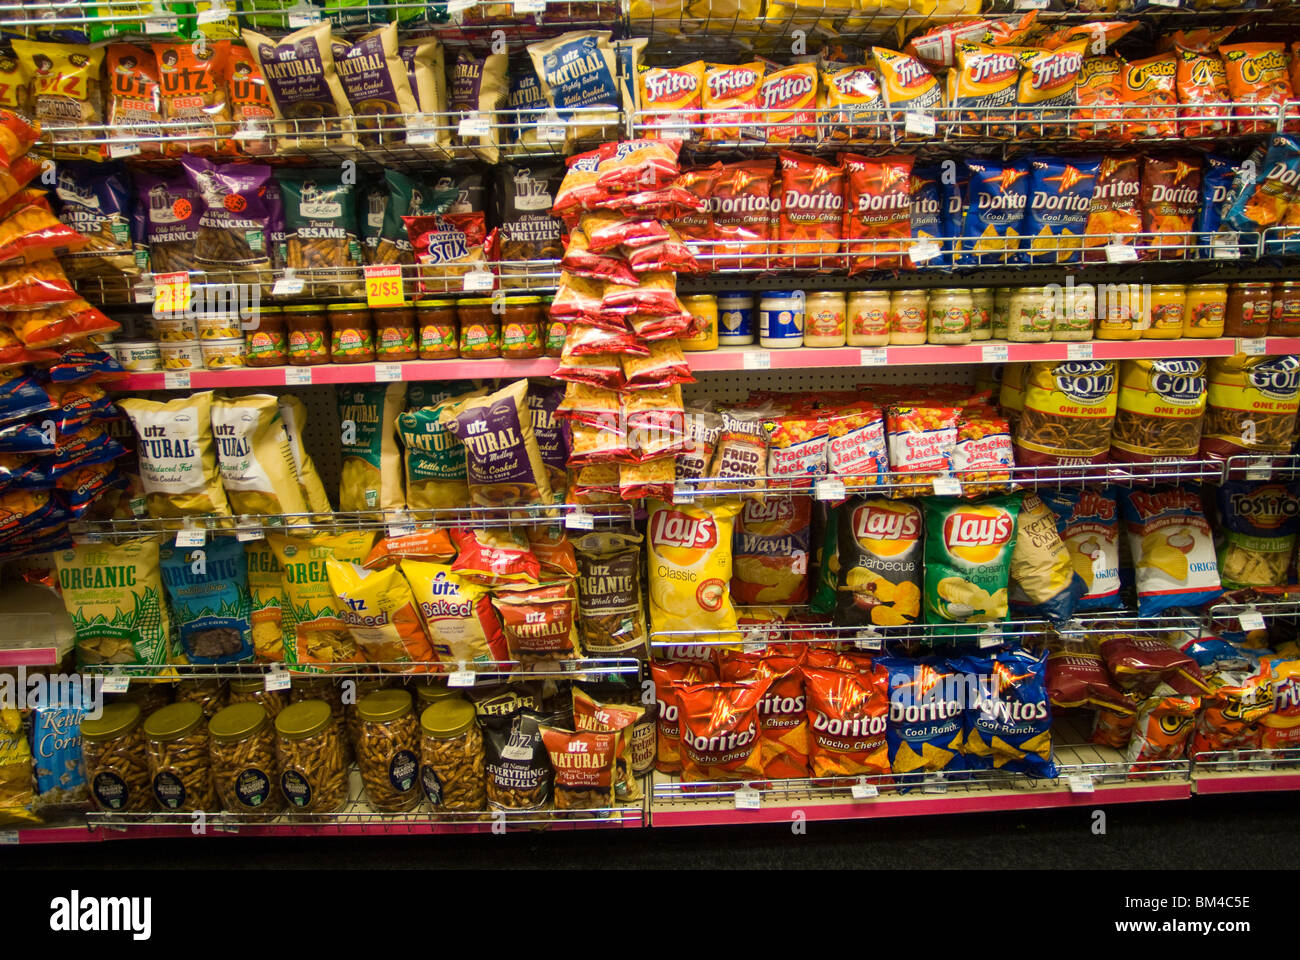 A display of tasty chips and other snacks in a store in New York seen on Saturday, May 8, 2010. (© Richard B. Levine) Stock Photo